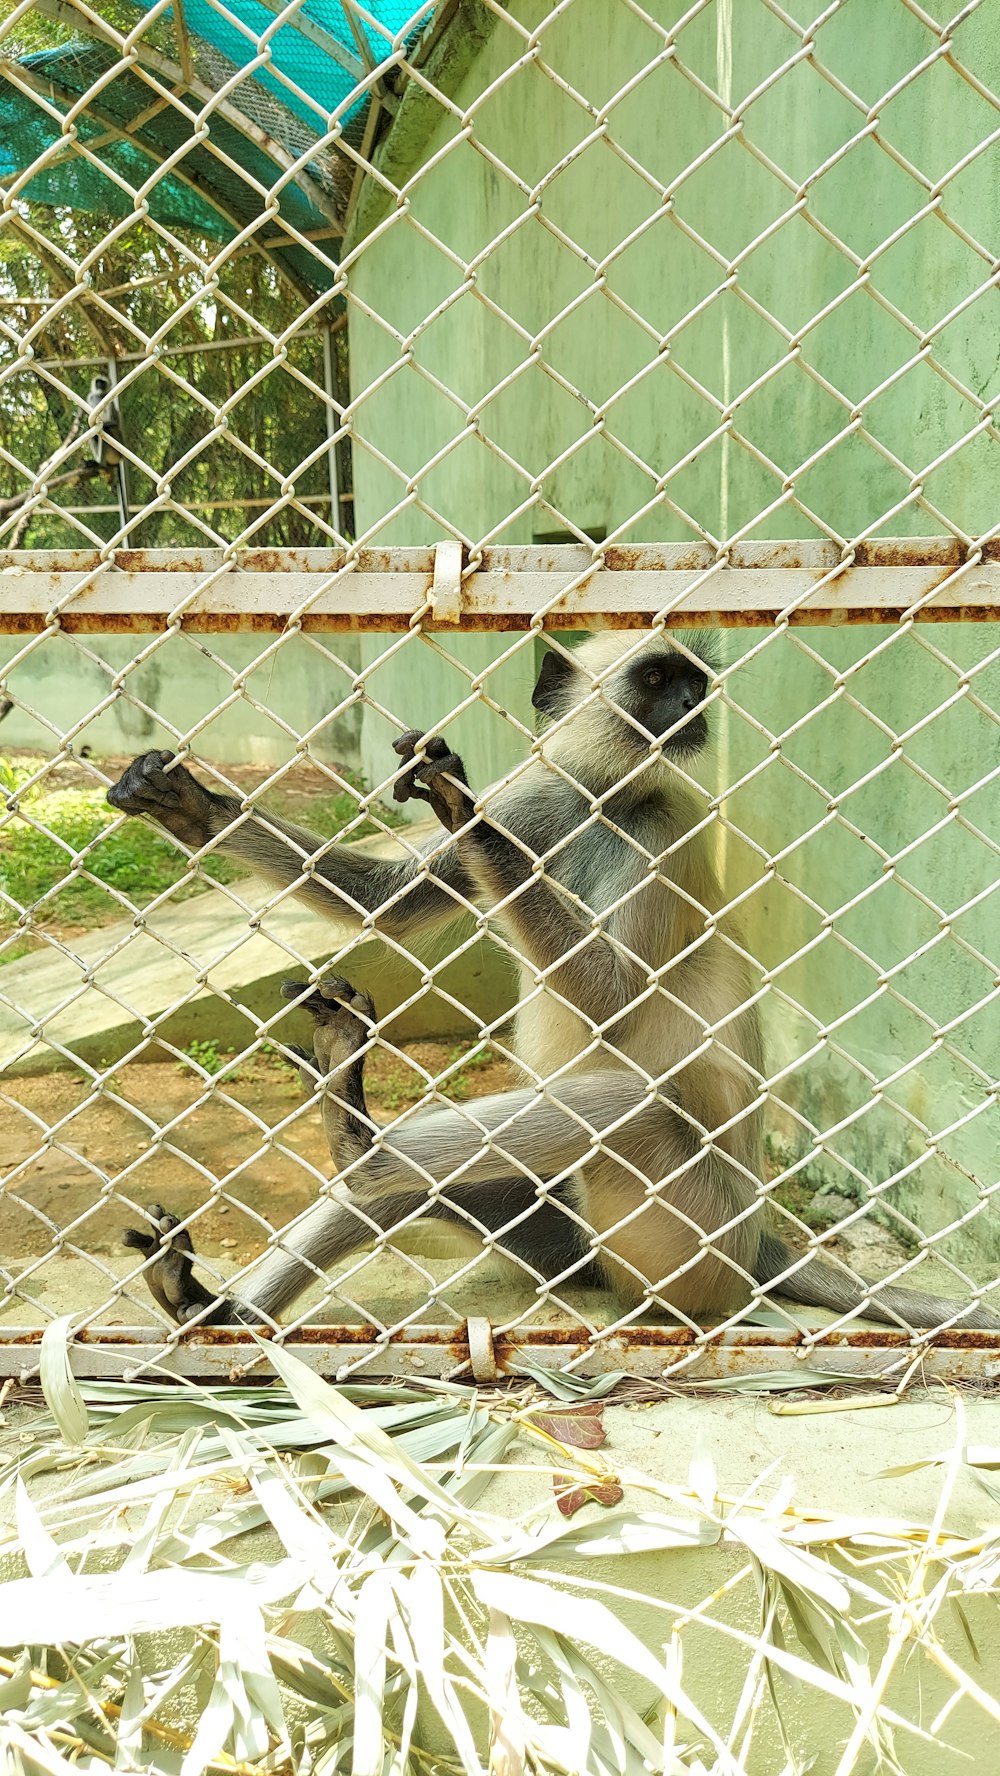 a monkey sitting in a zoo enclosure behind a chain link fence